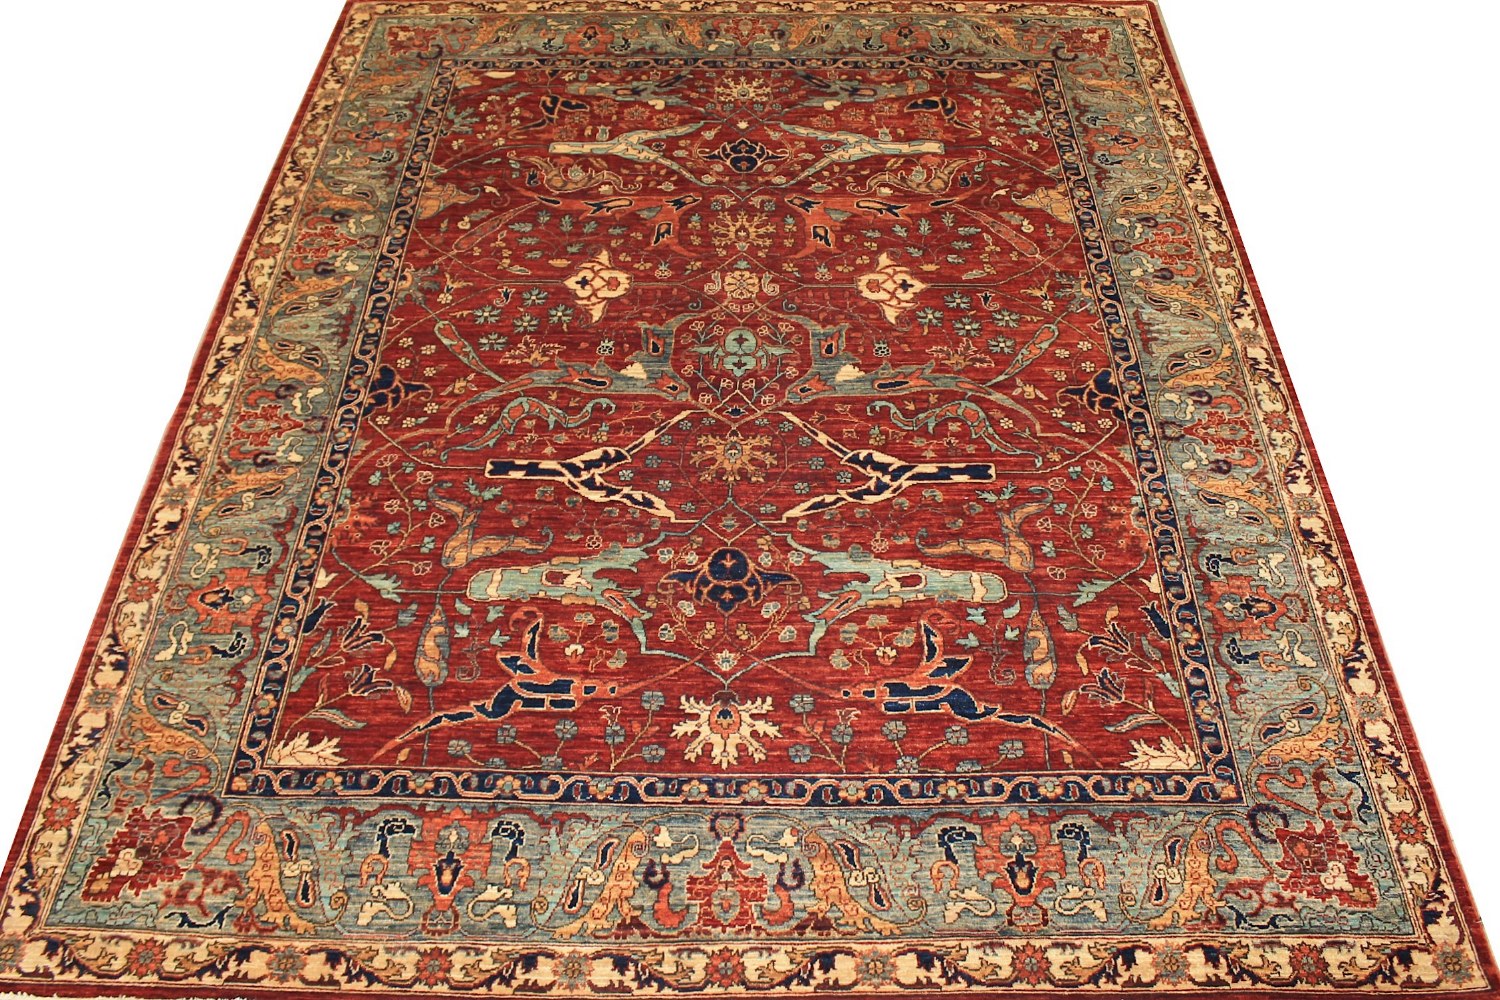 8x10 Aryana & Antique Revivals Hand Knotted Wool Area Rug - MR027261